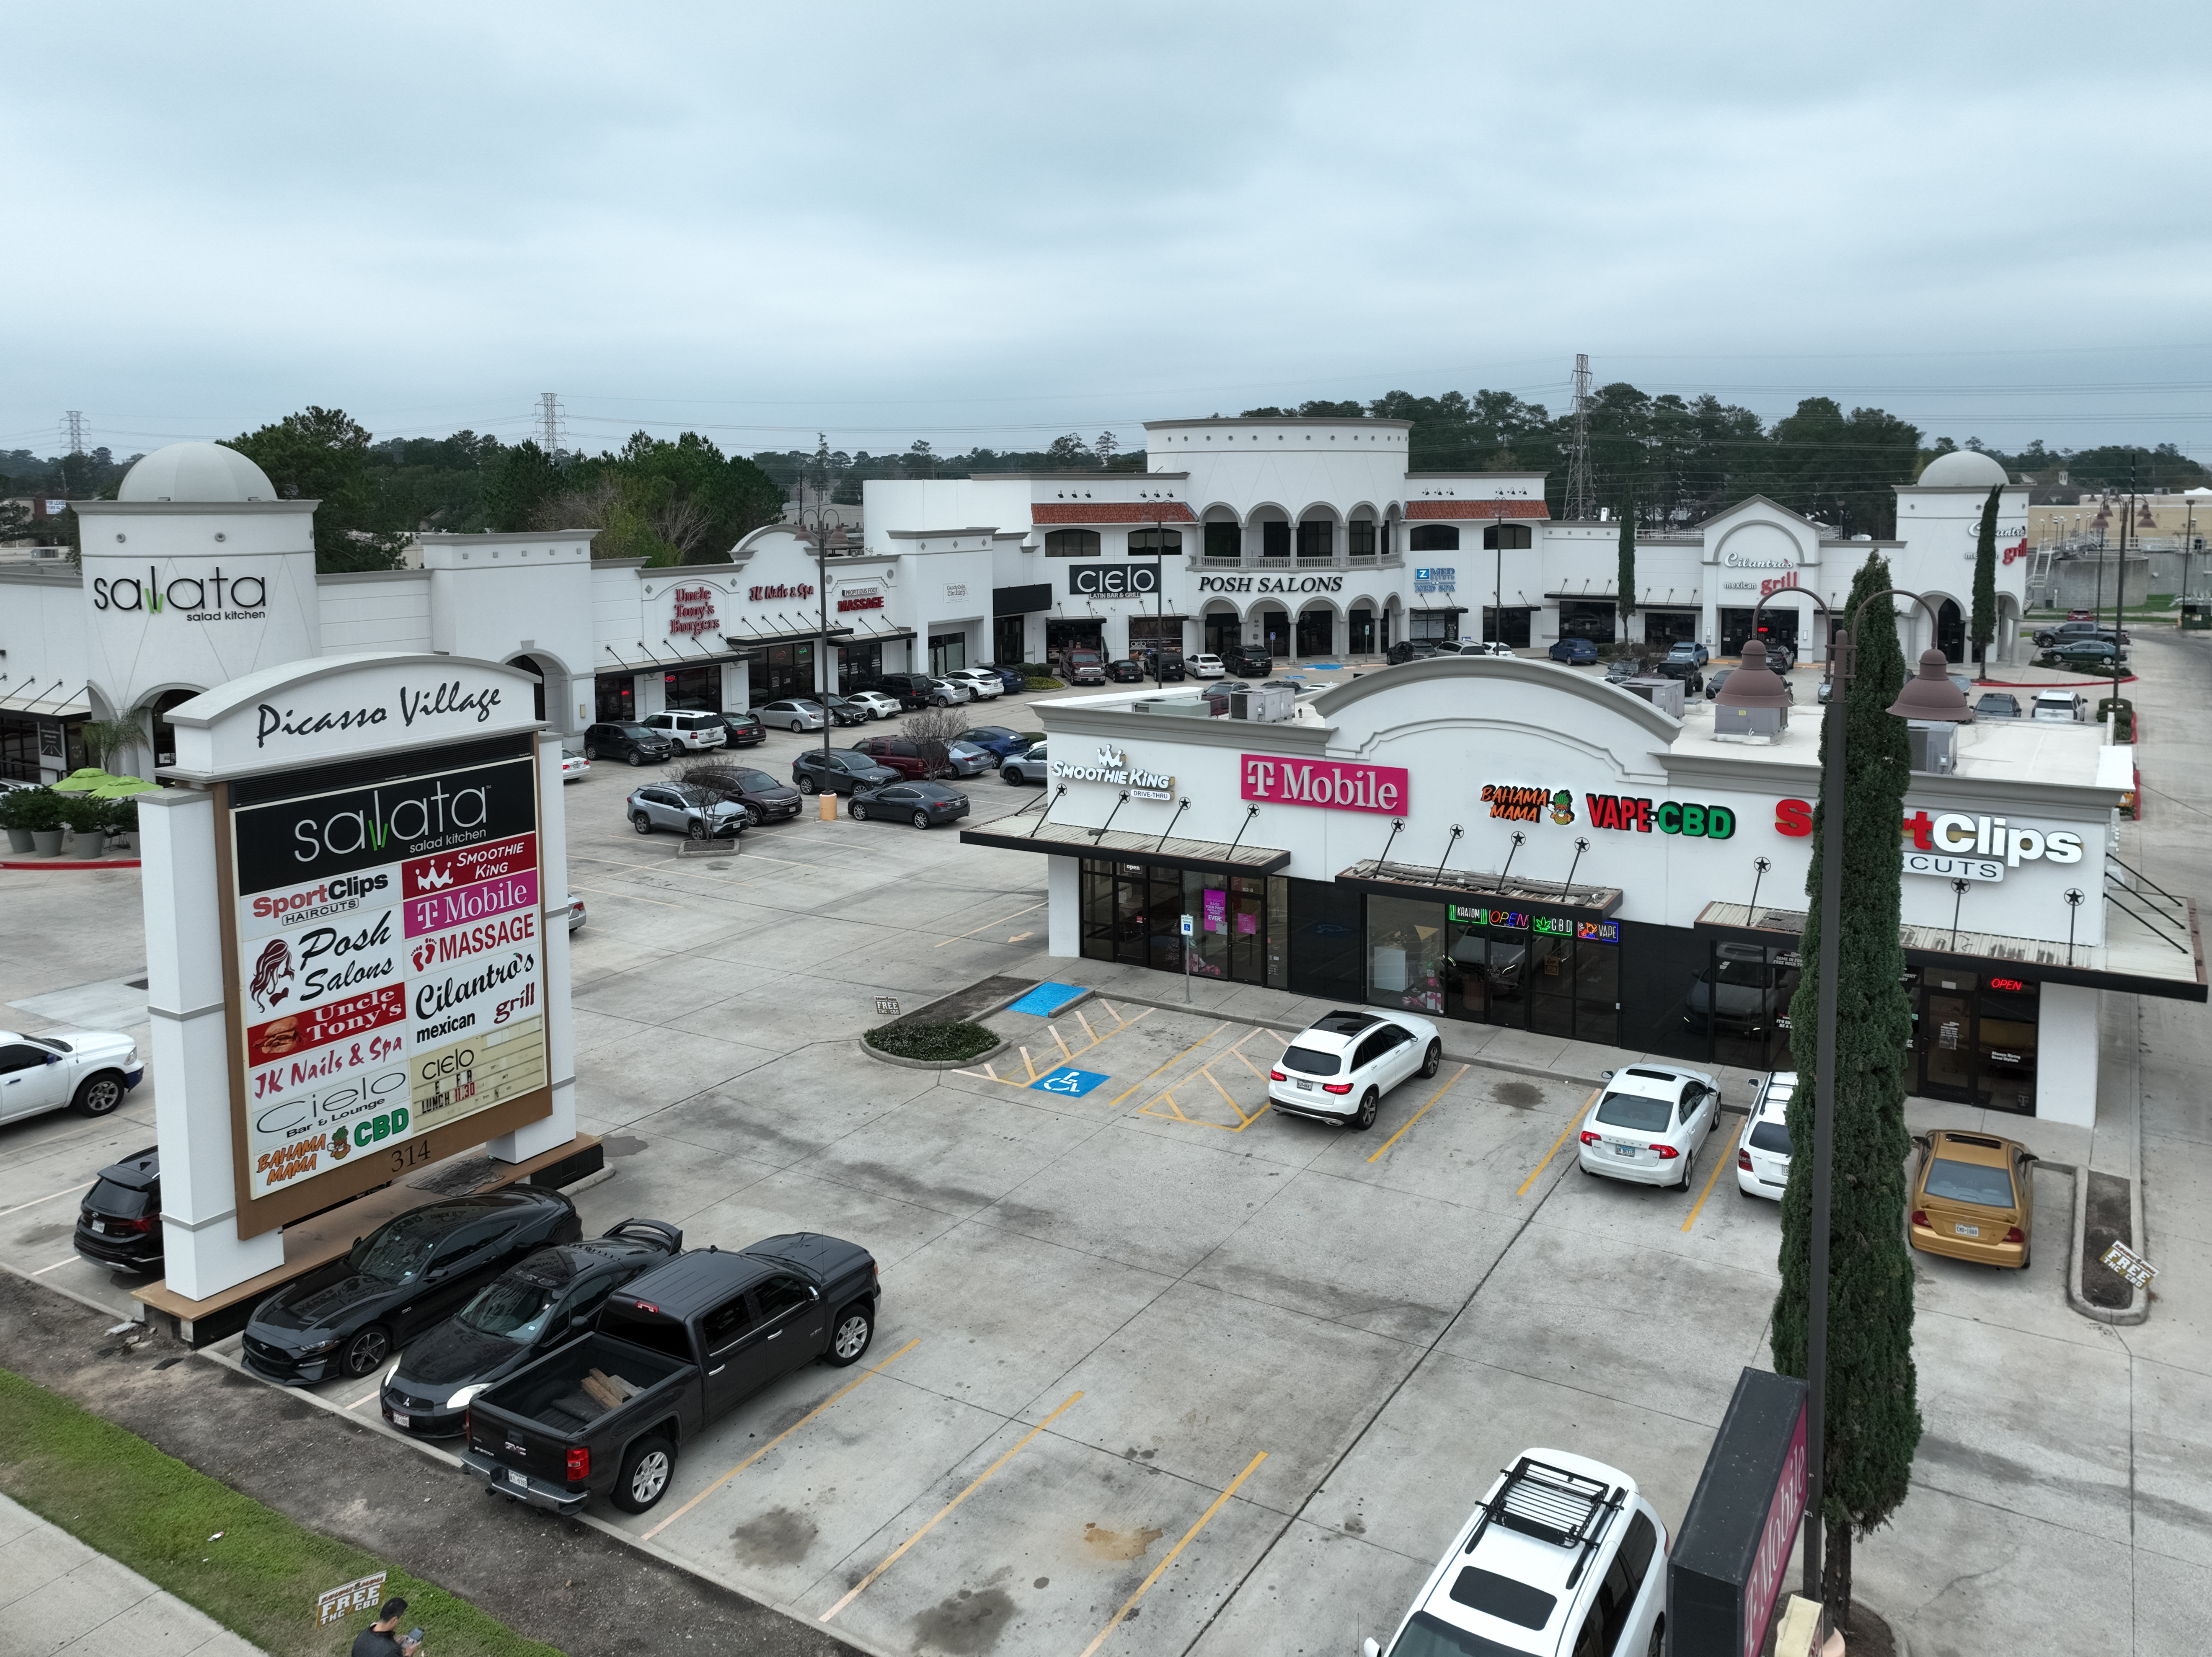 314 Sawdust Rd Retail and Office Space at Picasso Village